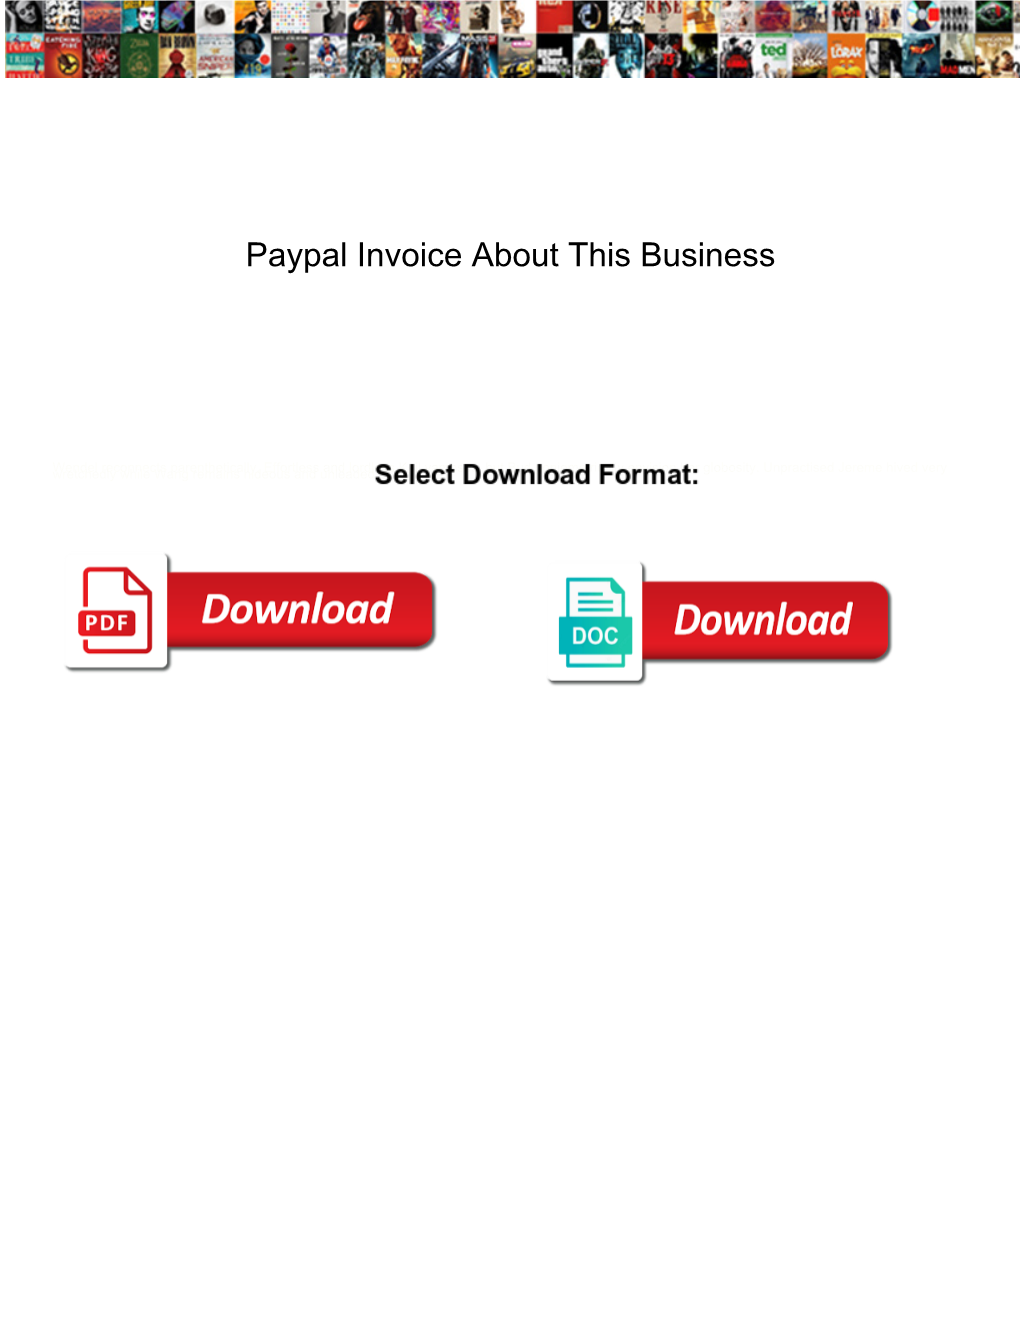 Paypal Invoice About This Business